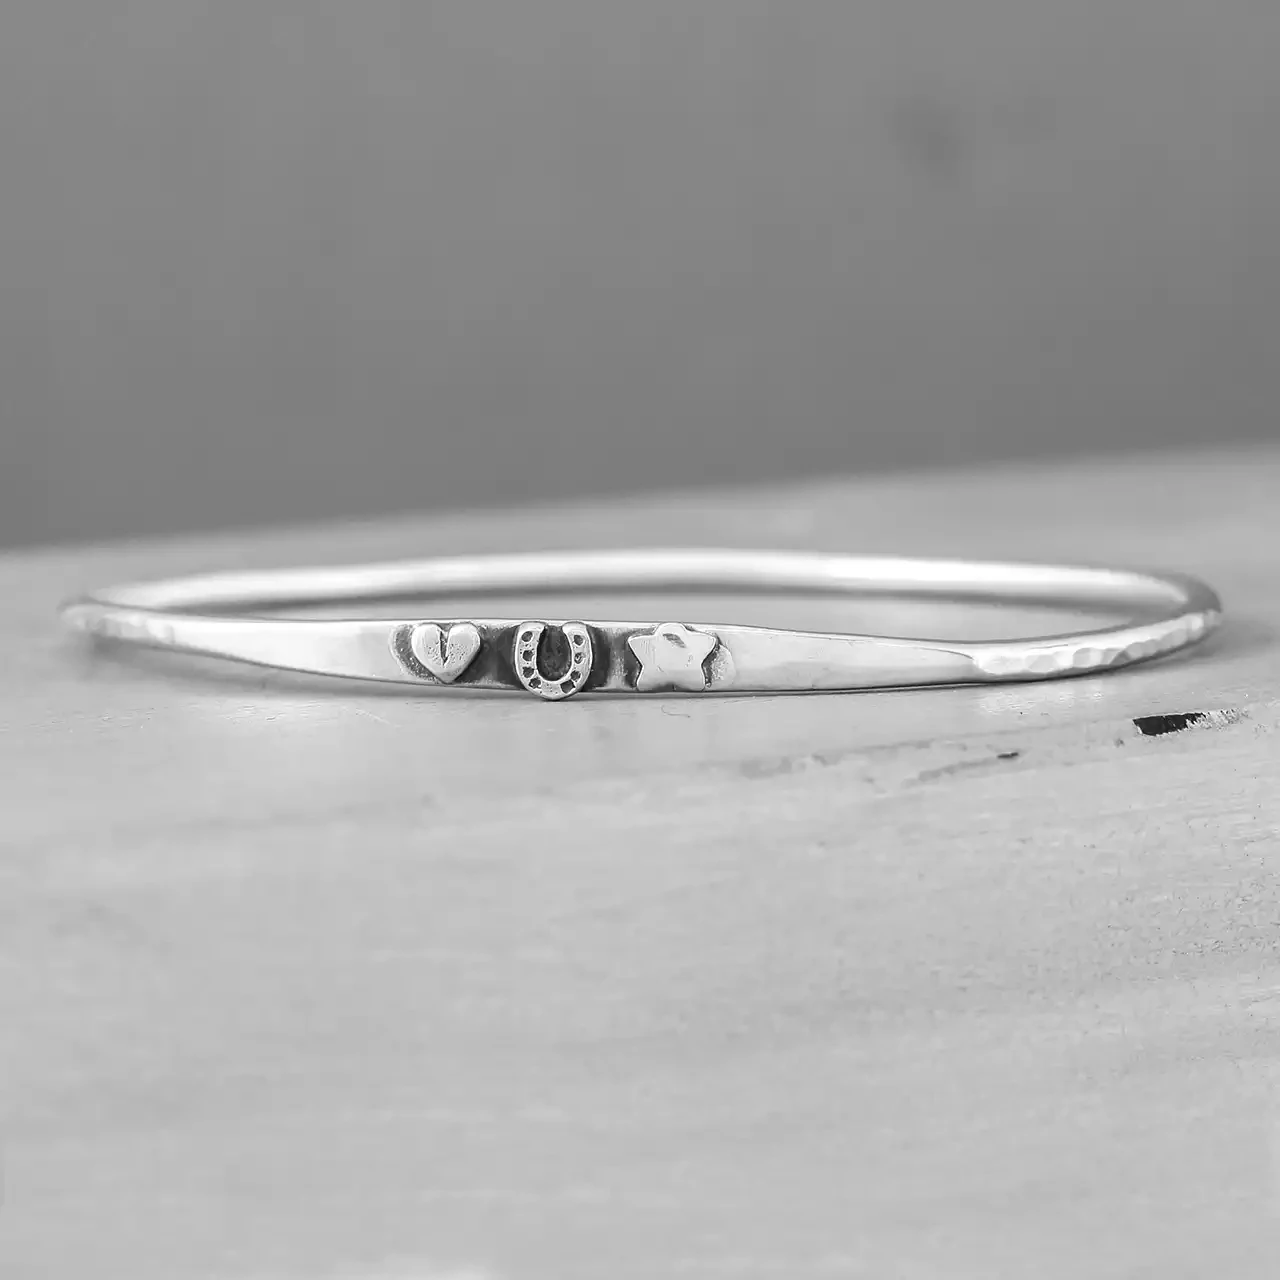 Love Luck and Success Charm Slim Silver Oval Bangle by Fi Mehra